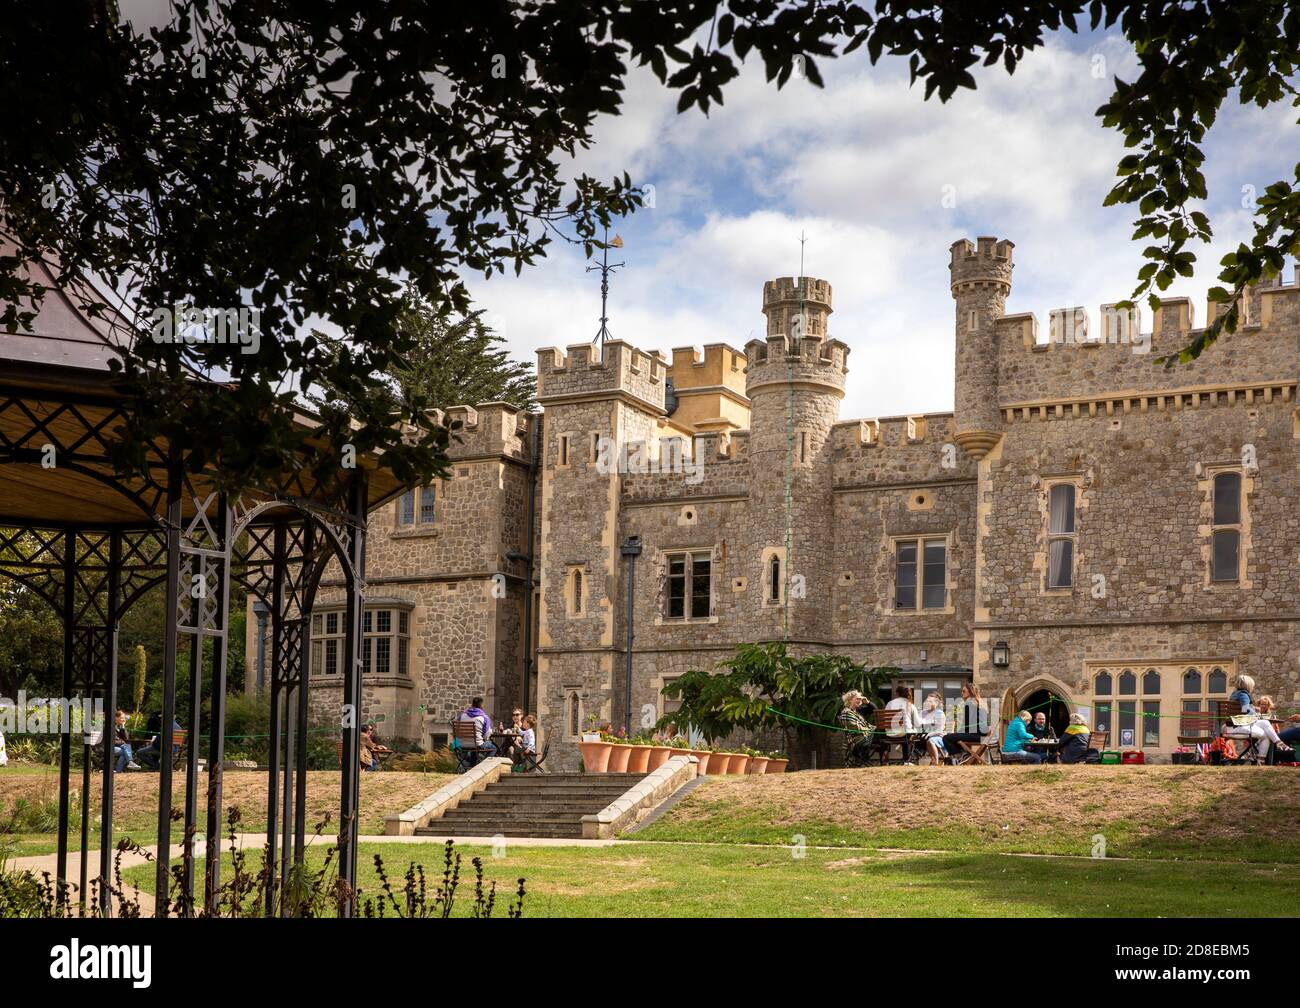 UK, Kent, Whitstable, Tower Hill, Whitstable Castle and gardens, customers on cafe lawn Stock Photo